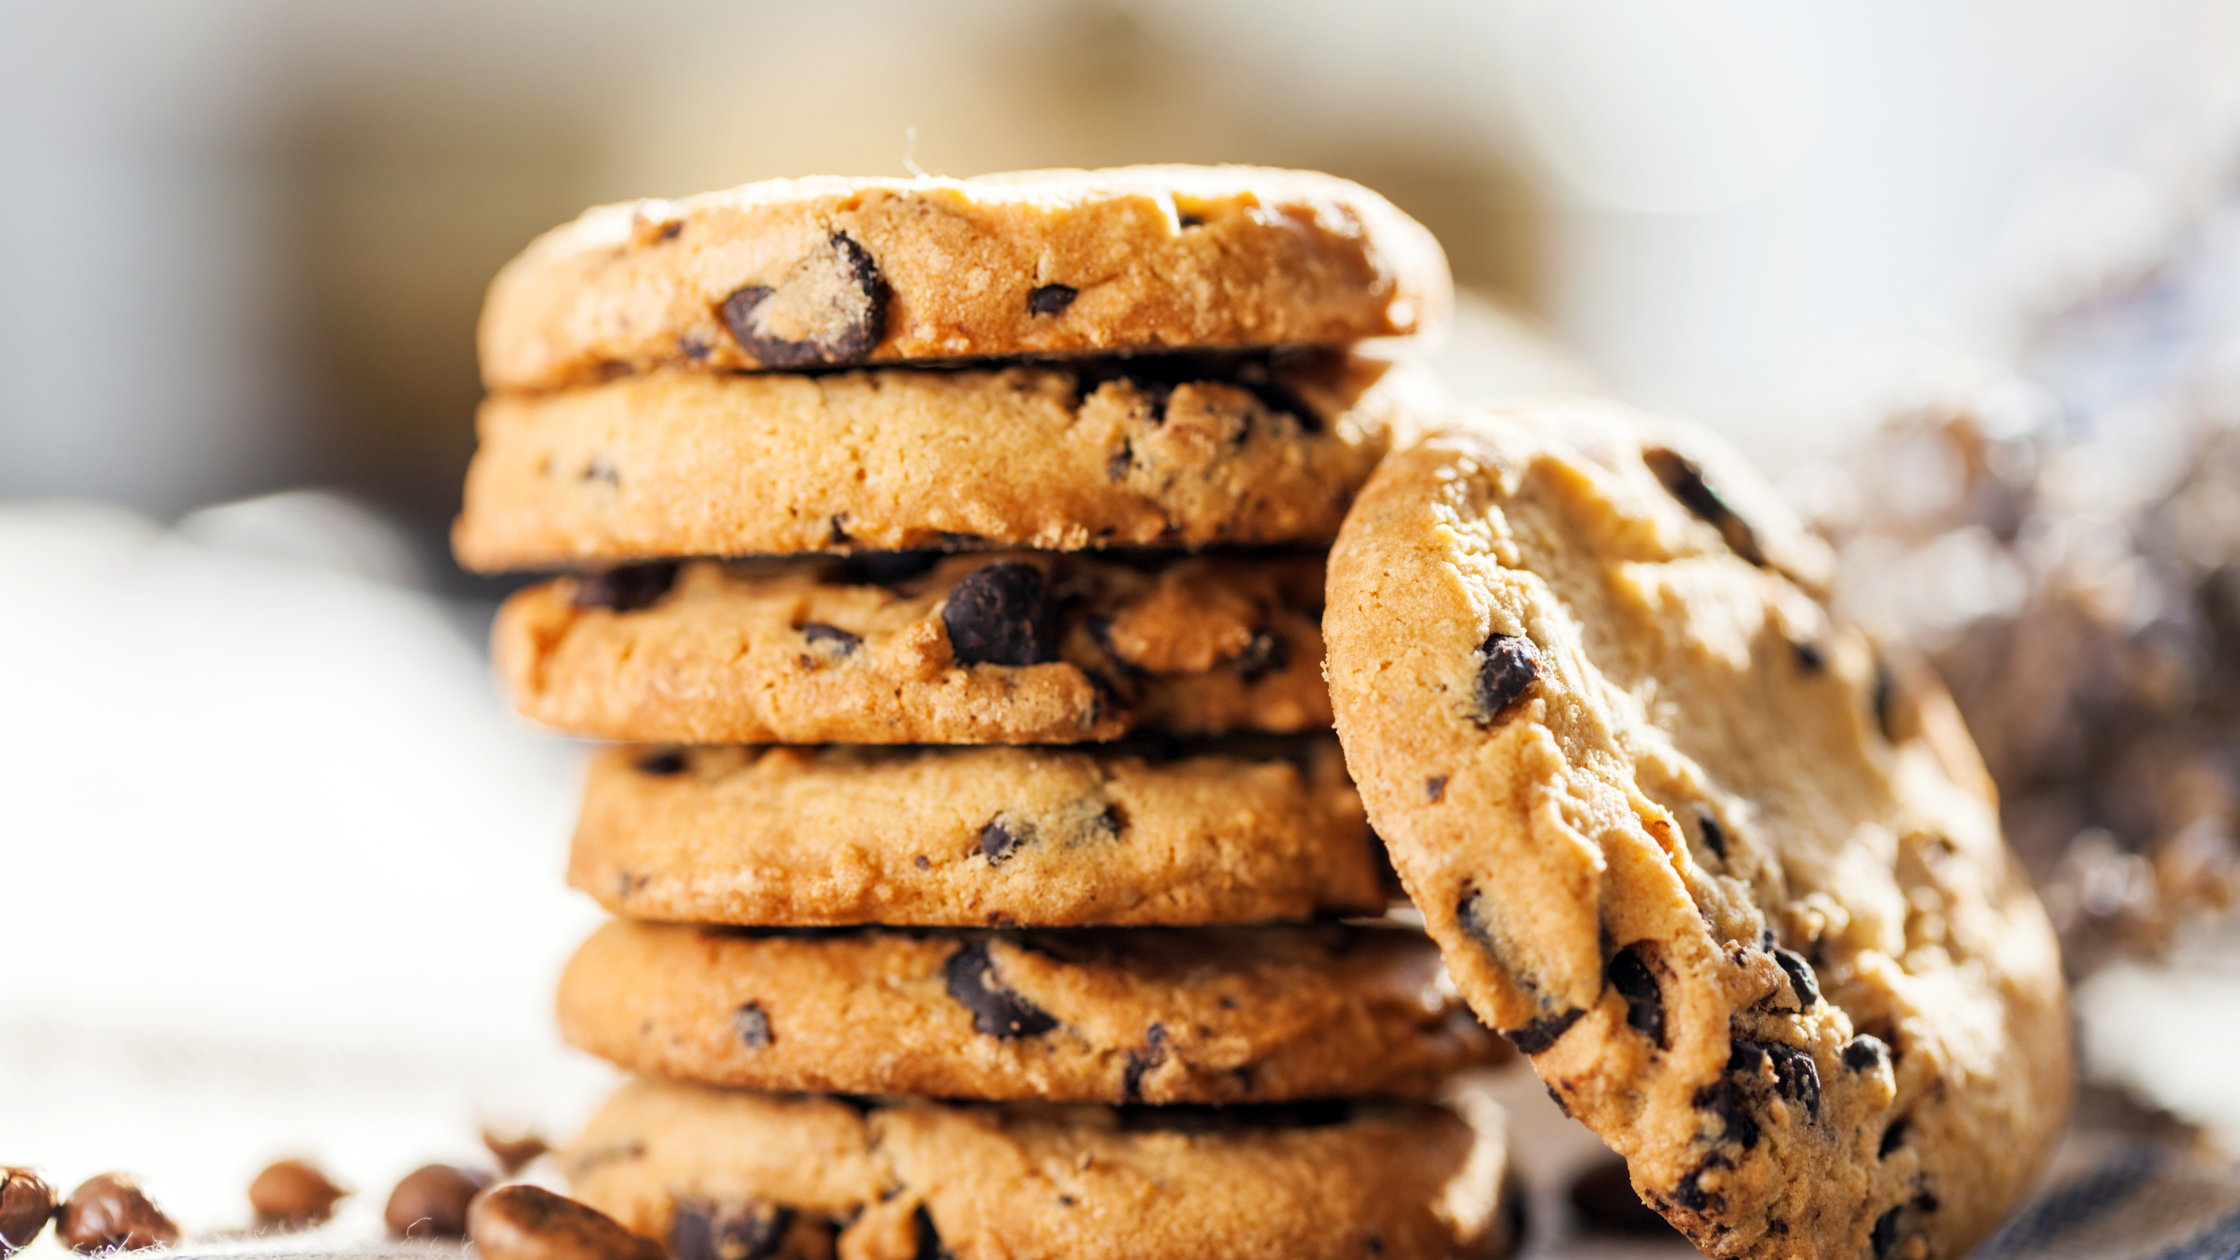 "The History Of A Chocolate Chip Cookie": A Sweet Accidental Invention